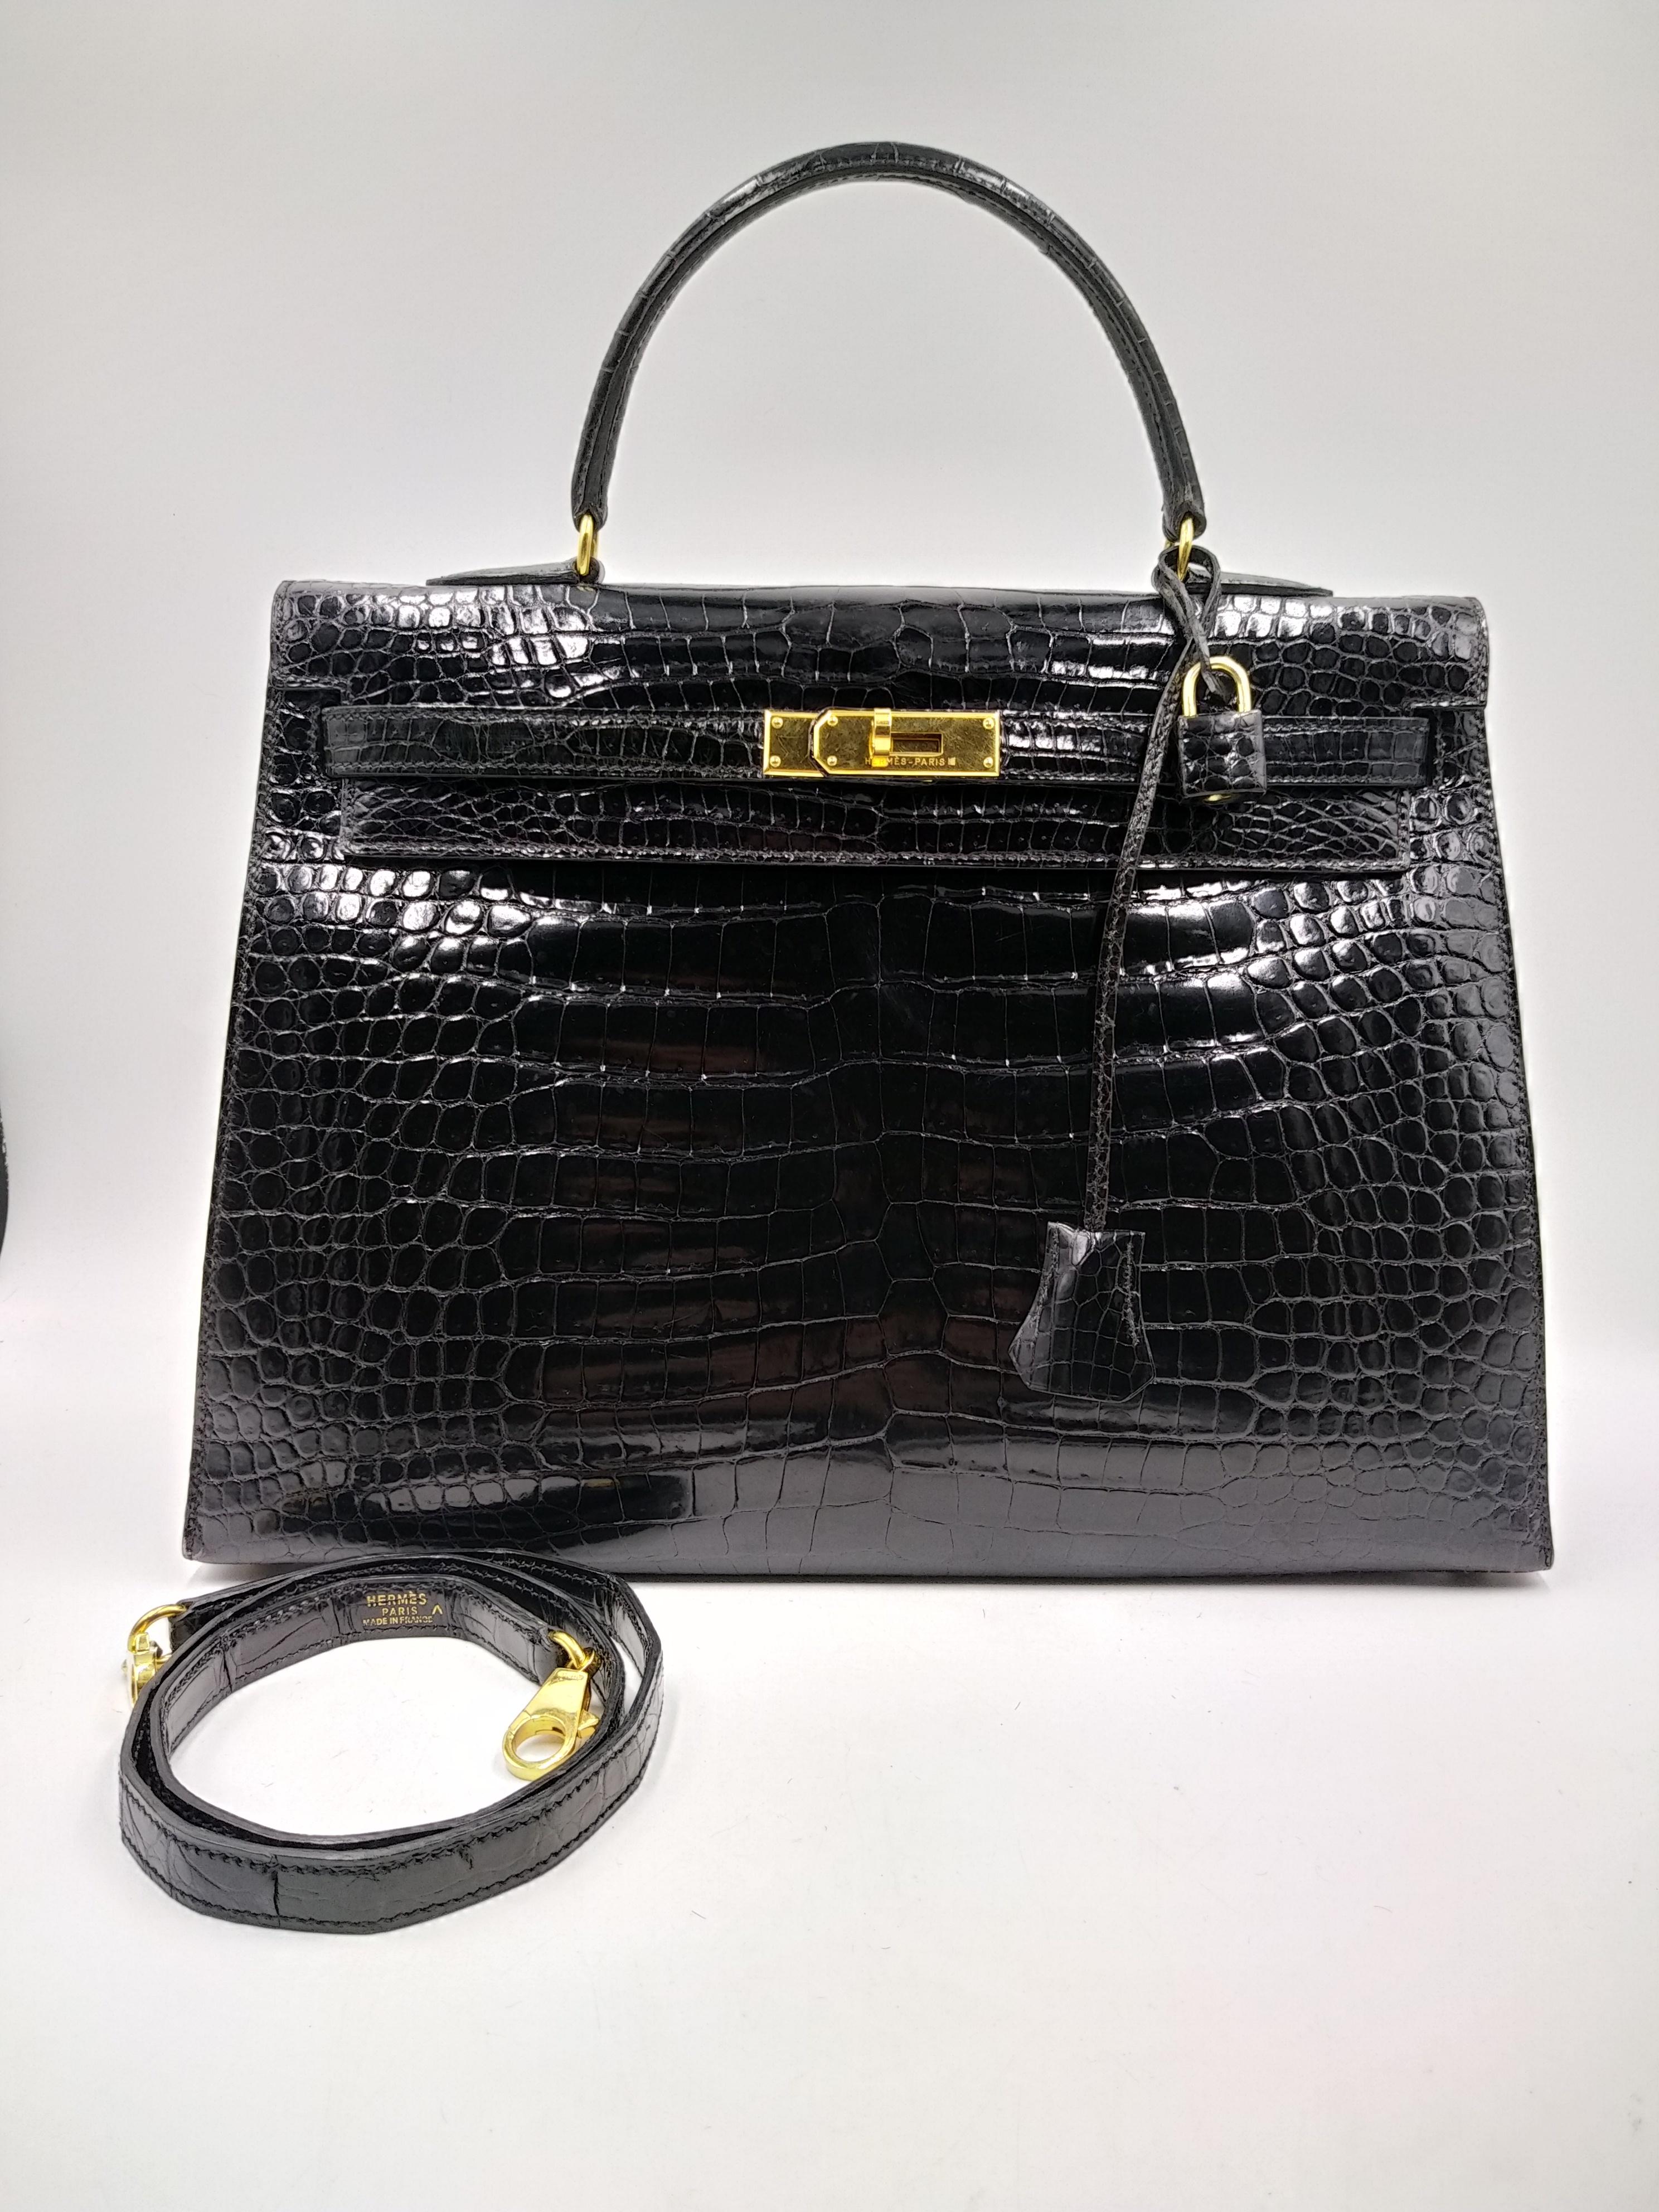 Hermès Kelly 35 Black Crocodile 1997
-100% authentic Hermès
- crocodile leather with gold-toned hardware
- zip pocket and two slip pockets
- keyholder and padlock
- interior in black leather
- additional Strap
- dustbag
- CITES INCLUDED